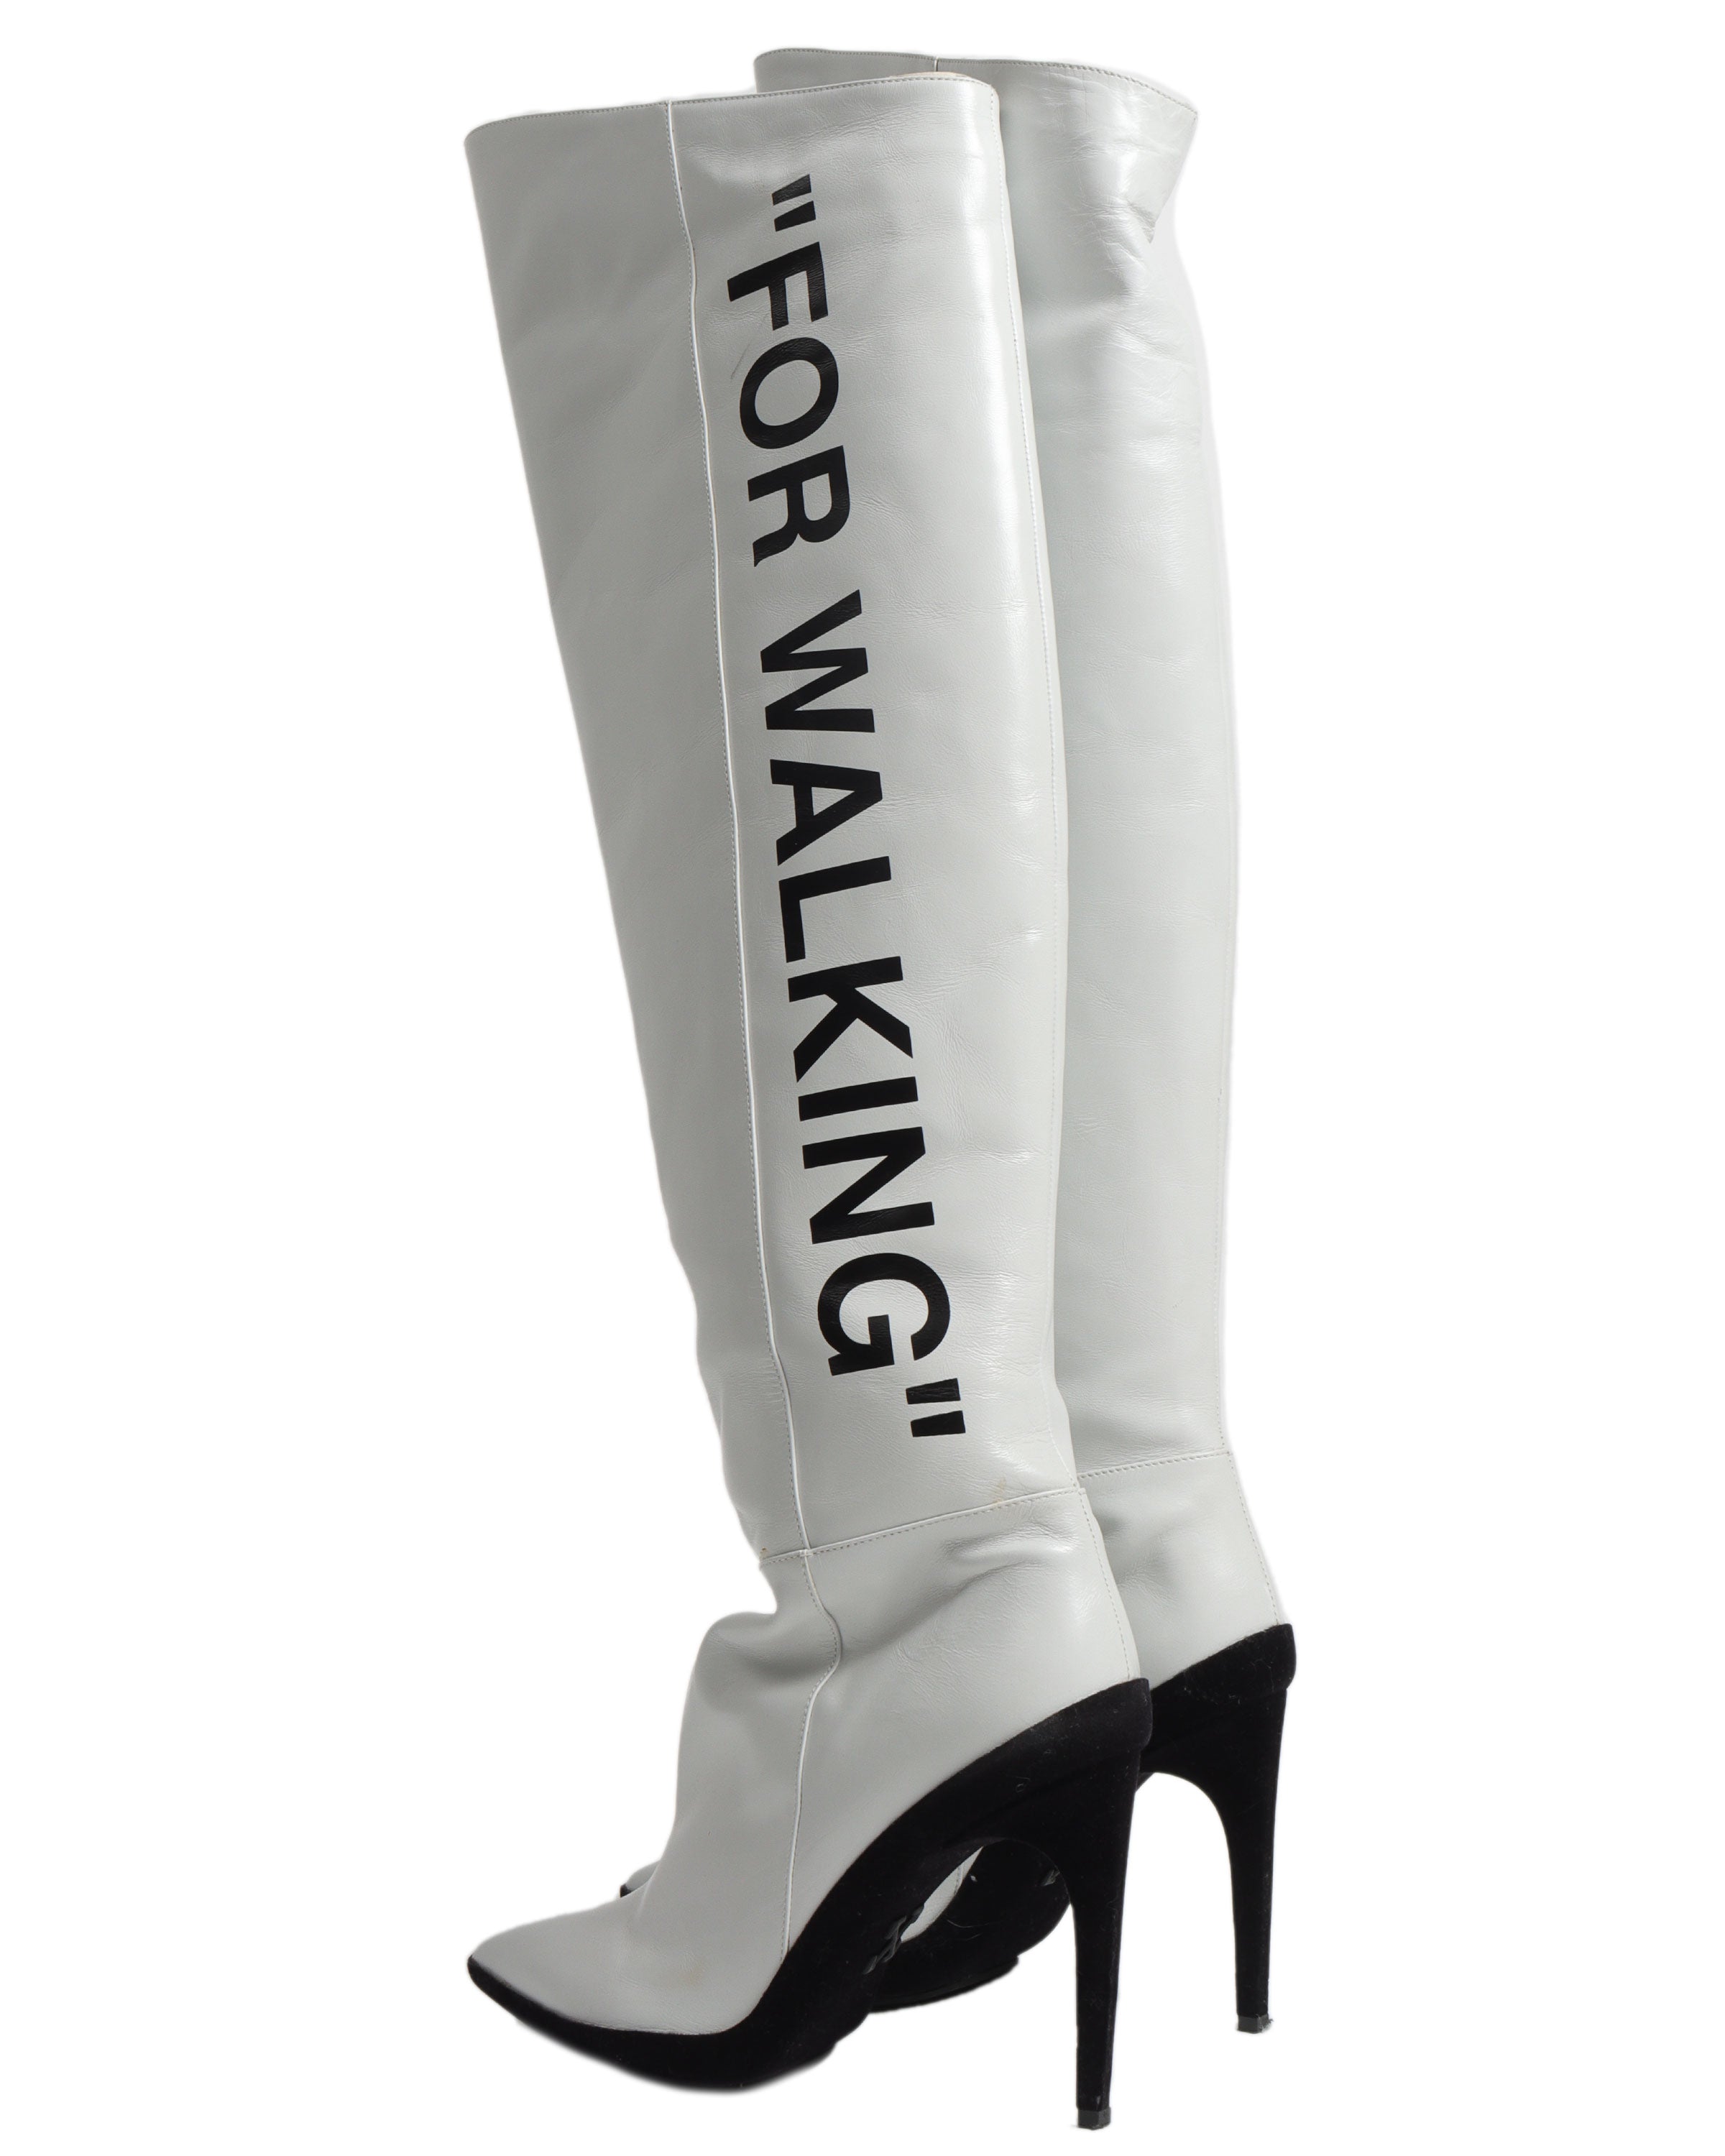 "FOR WALKING" Knee-High Leather Boots